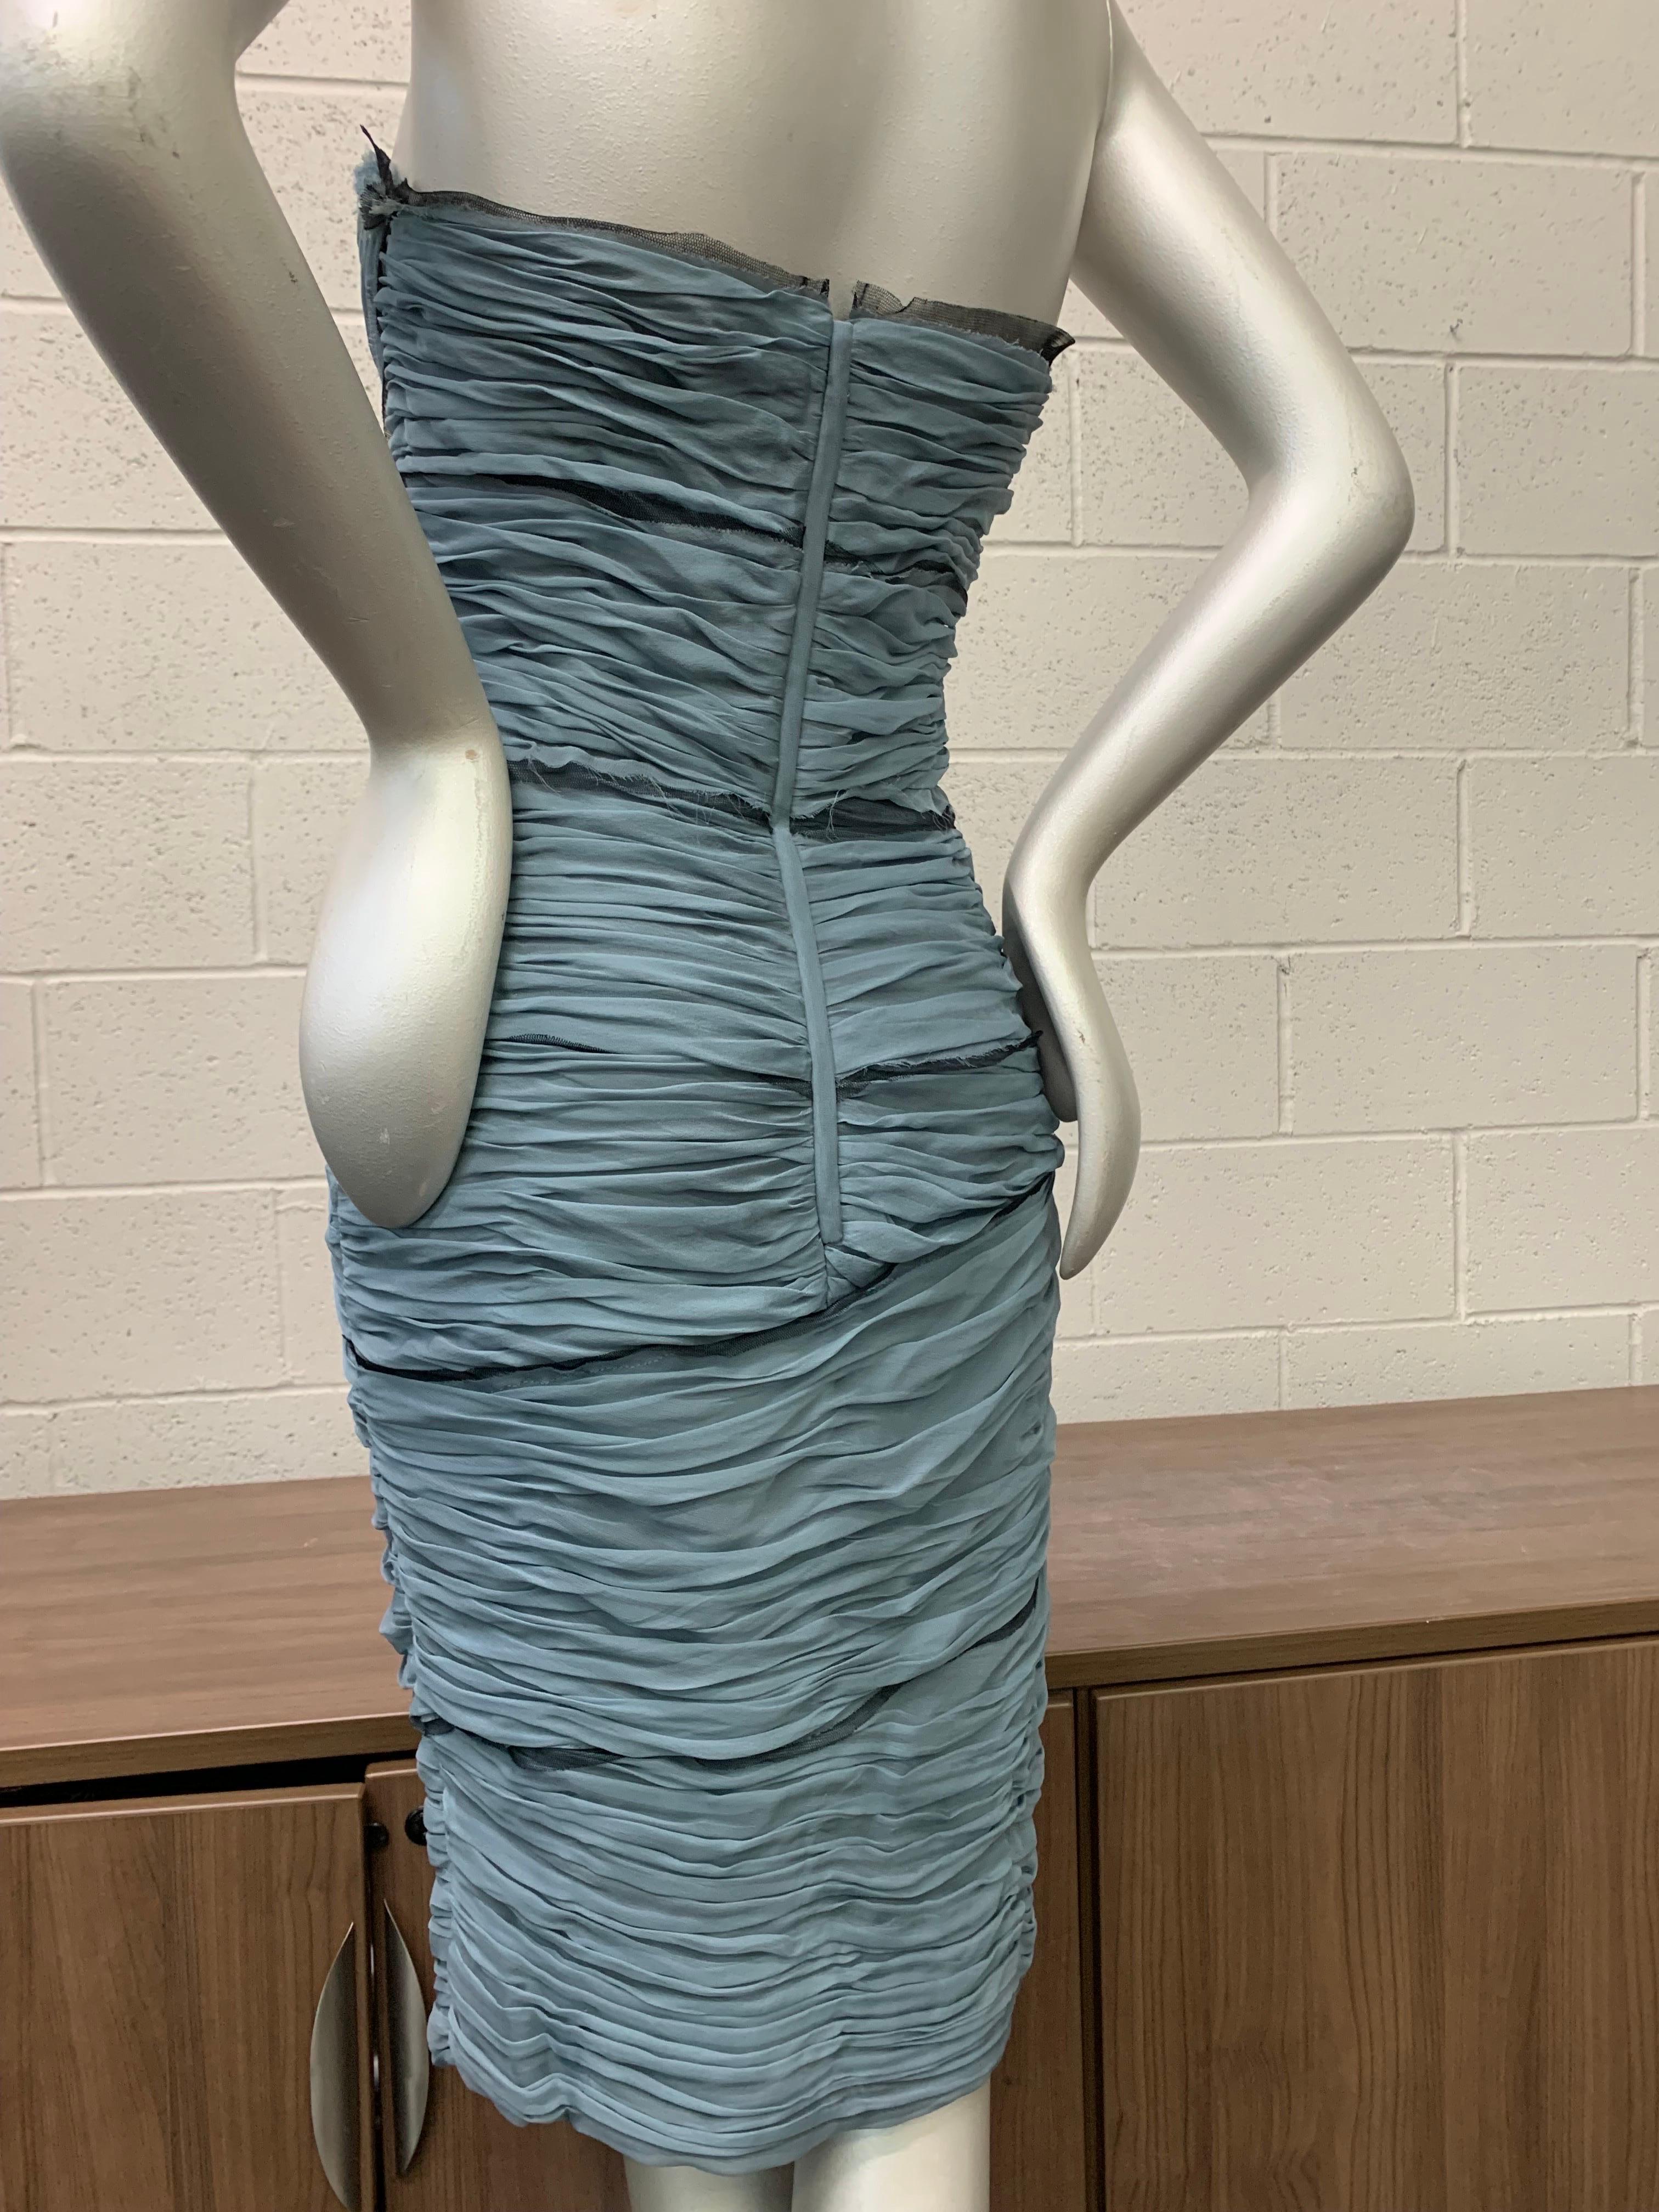 Contemporary Dolce & Gabbana powder blue silk chiffon strapless sheath cocktail dress. Ruched chiffon is attached to tulle base which is visible in parts. 